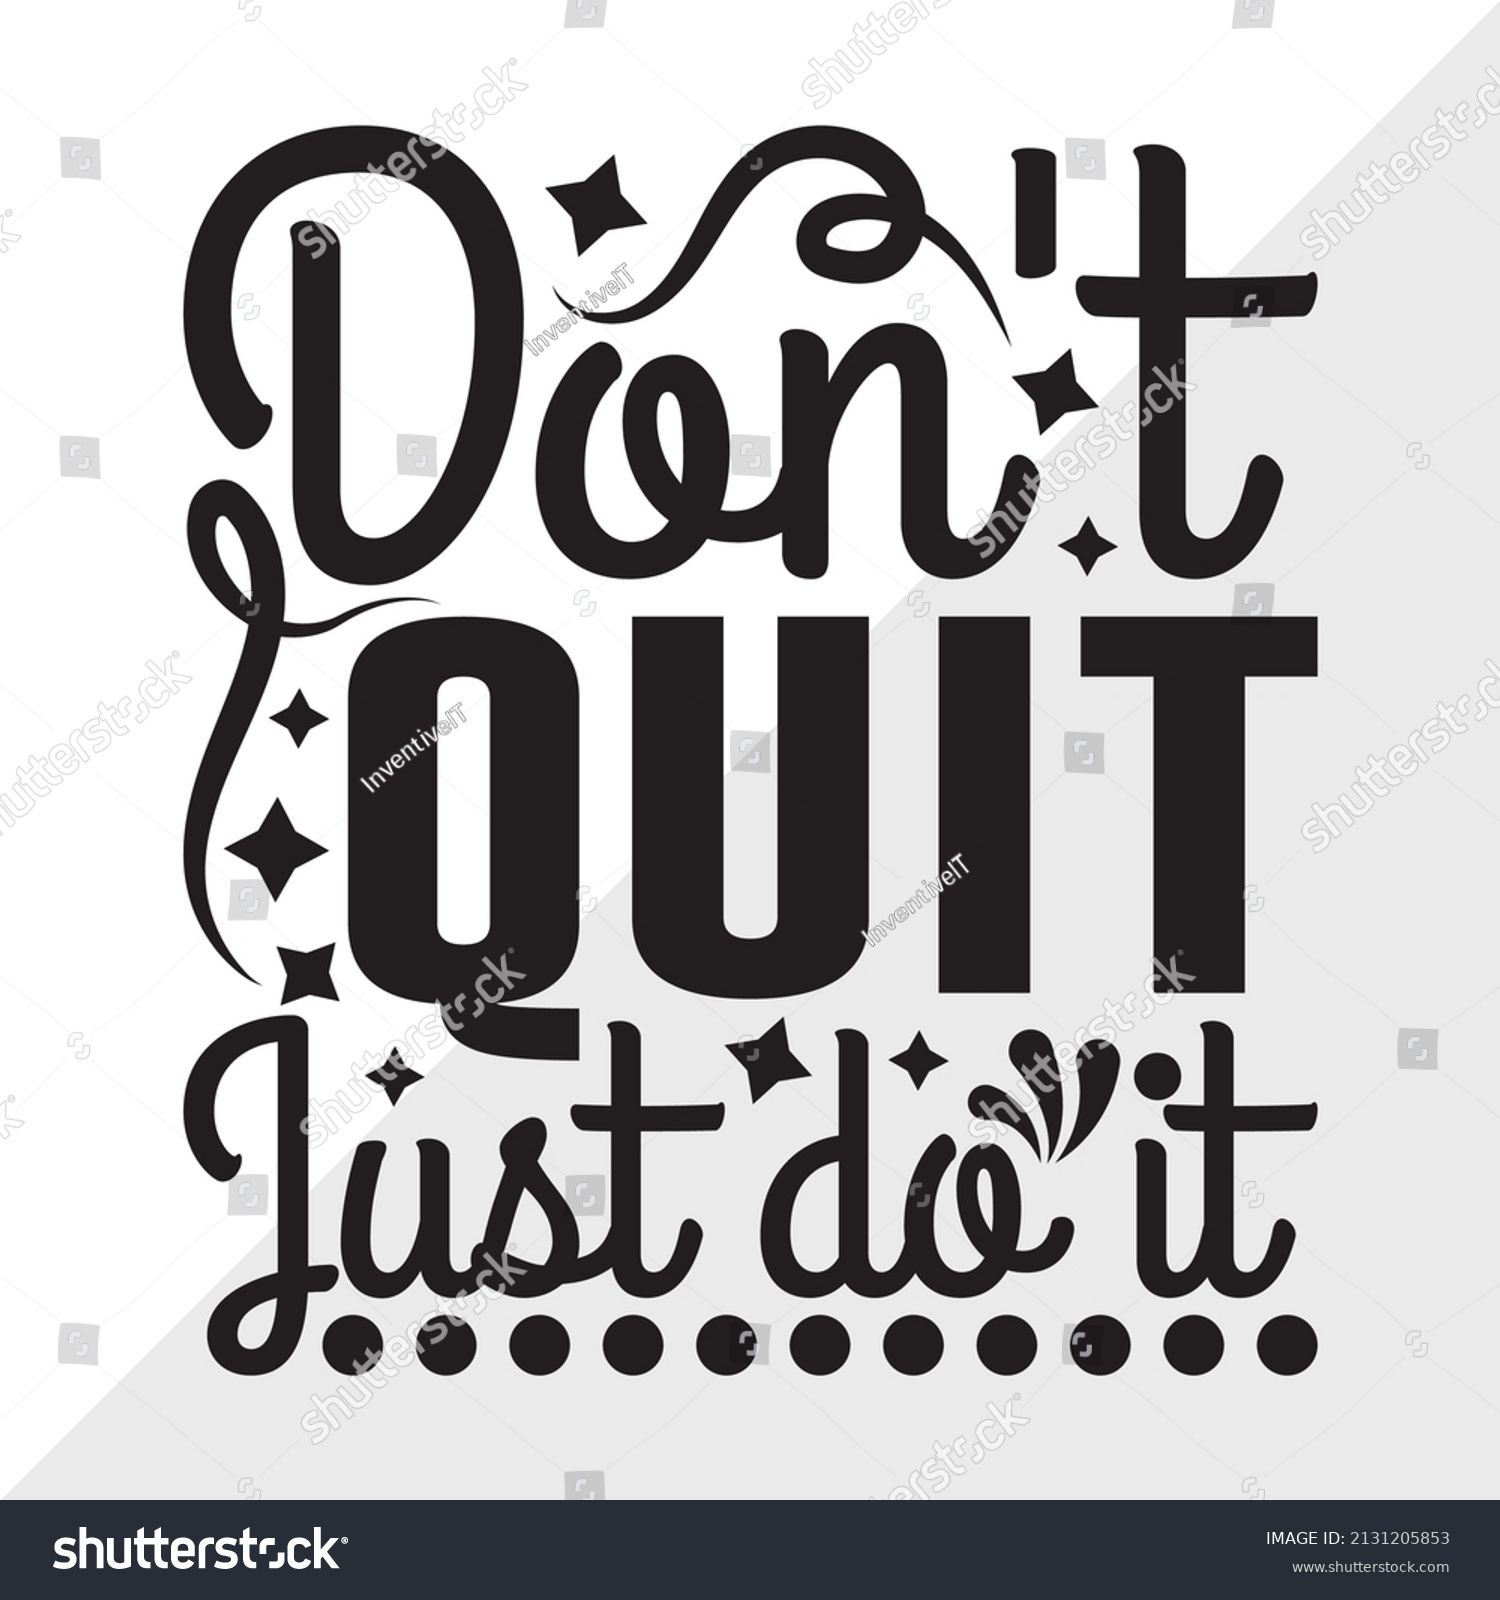 dont-quit-just-do-printable-vector-stock-vector-royalty-free